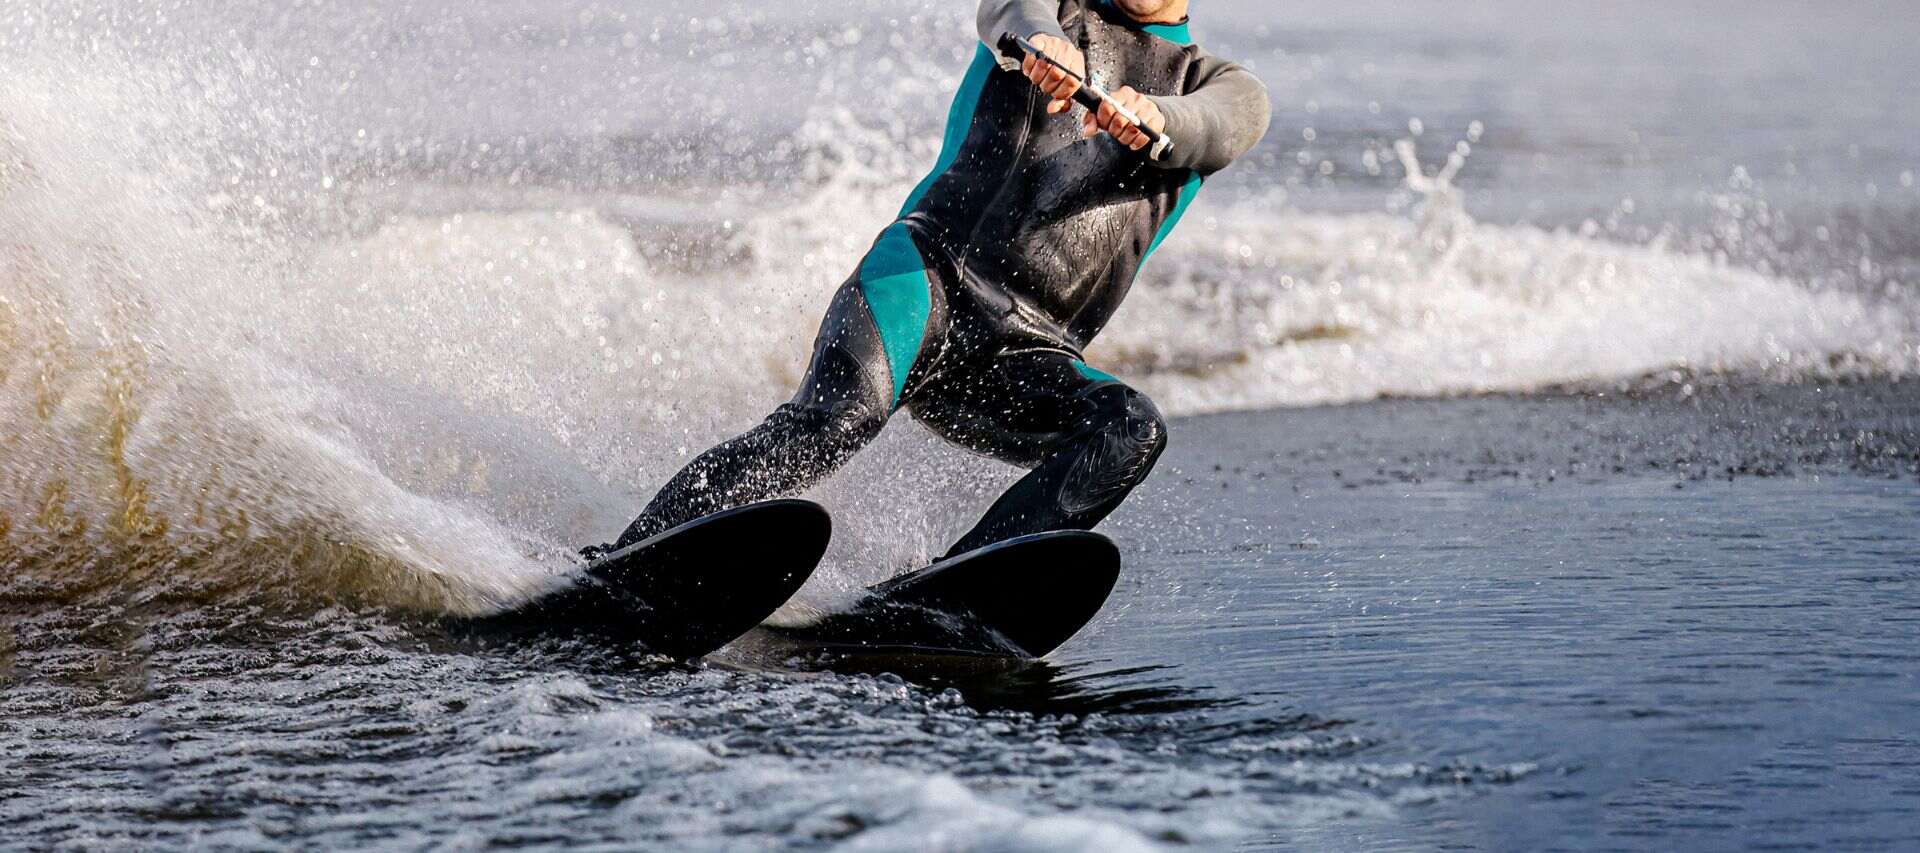 man water-skiing in a black wetsuit with blue inserts creating a splash of water